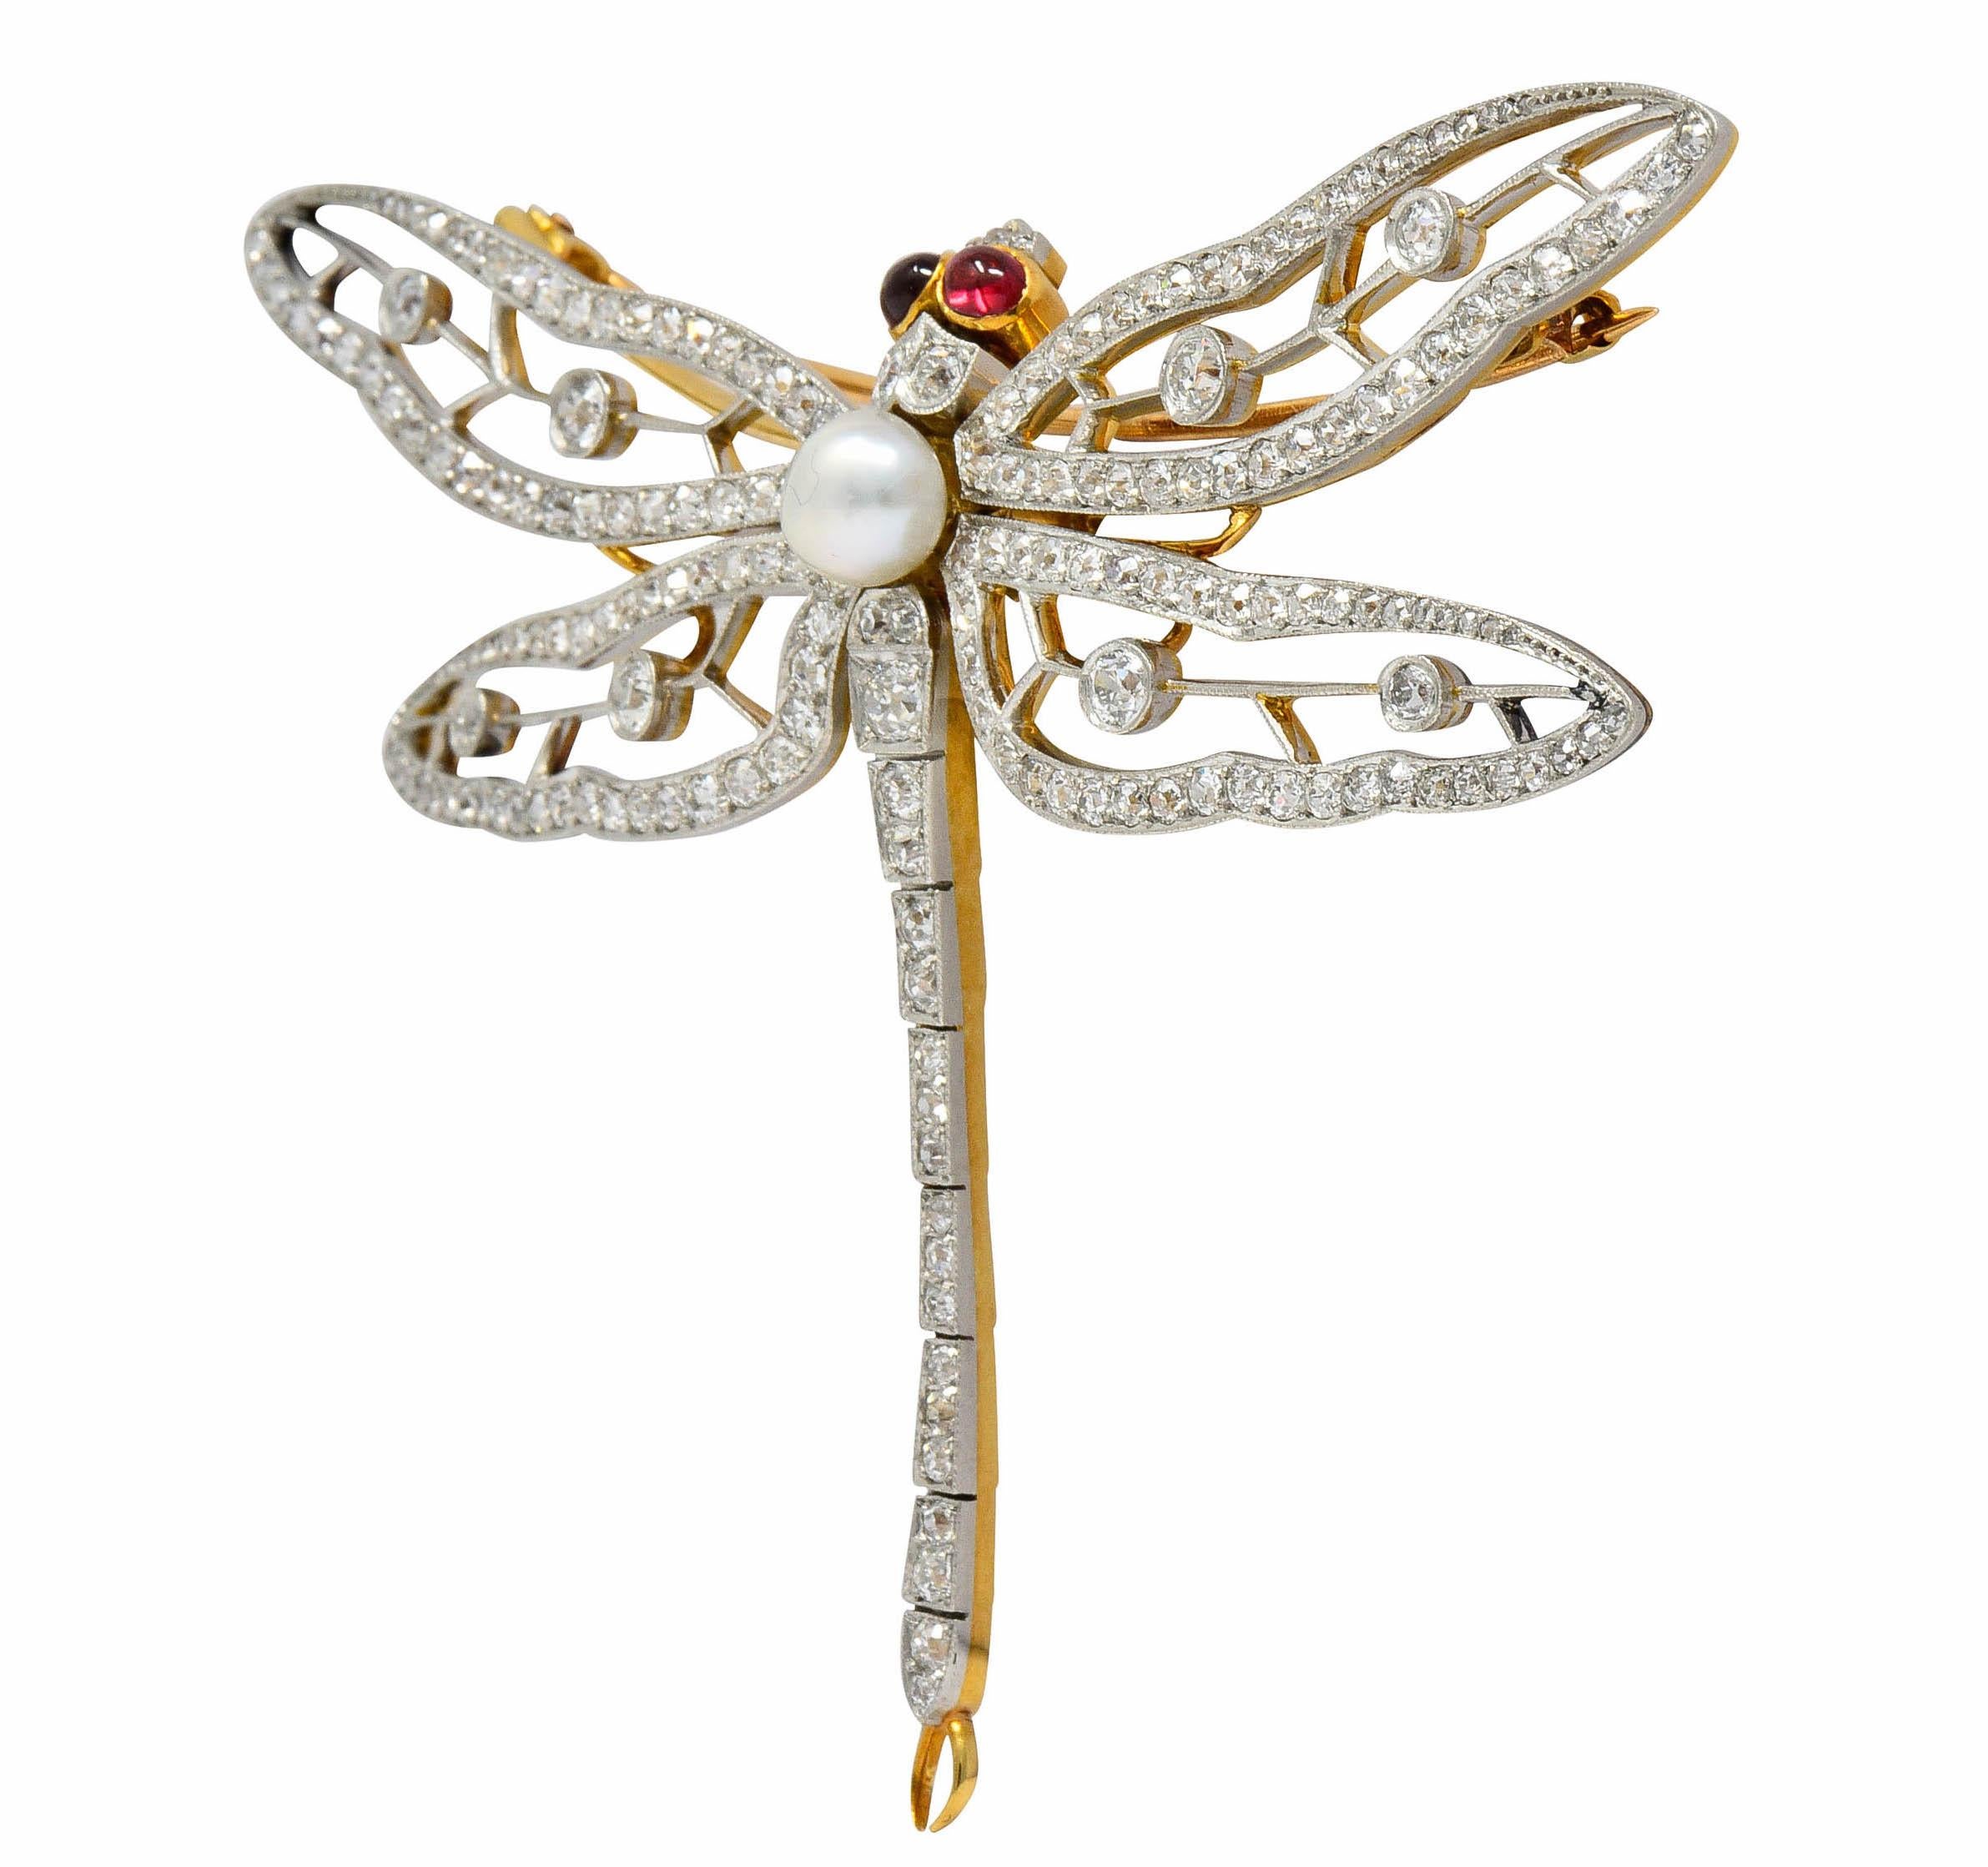 Designed as a large dragonfly with delicately pierced wings accented by milgrain

With oval spinel cabochon eyes, bezel set in gold, well-matched and light red in color

Centering a 6.5 mm semi-round button pearl, white in body color with silvery